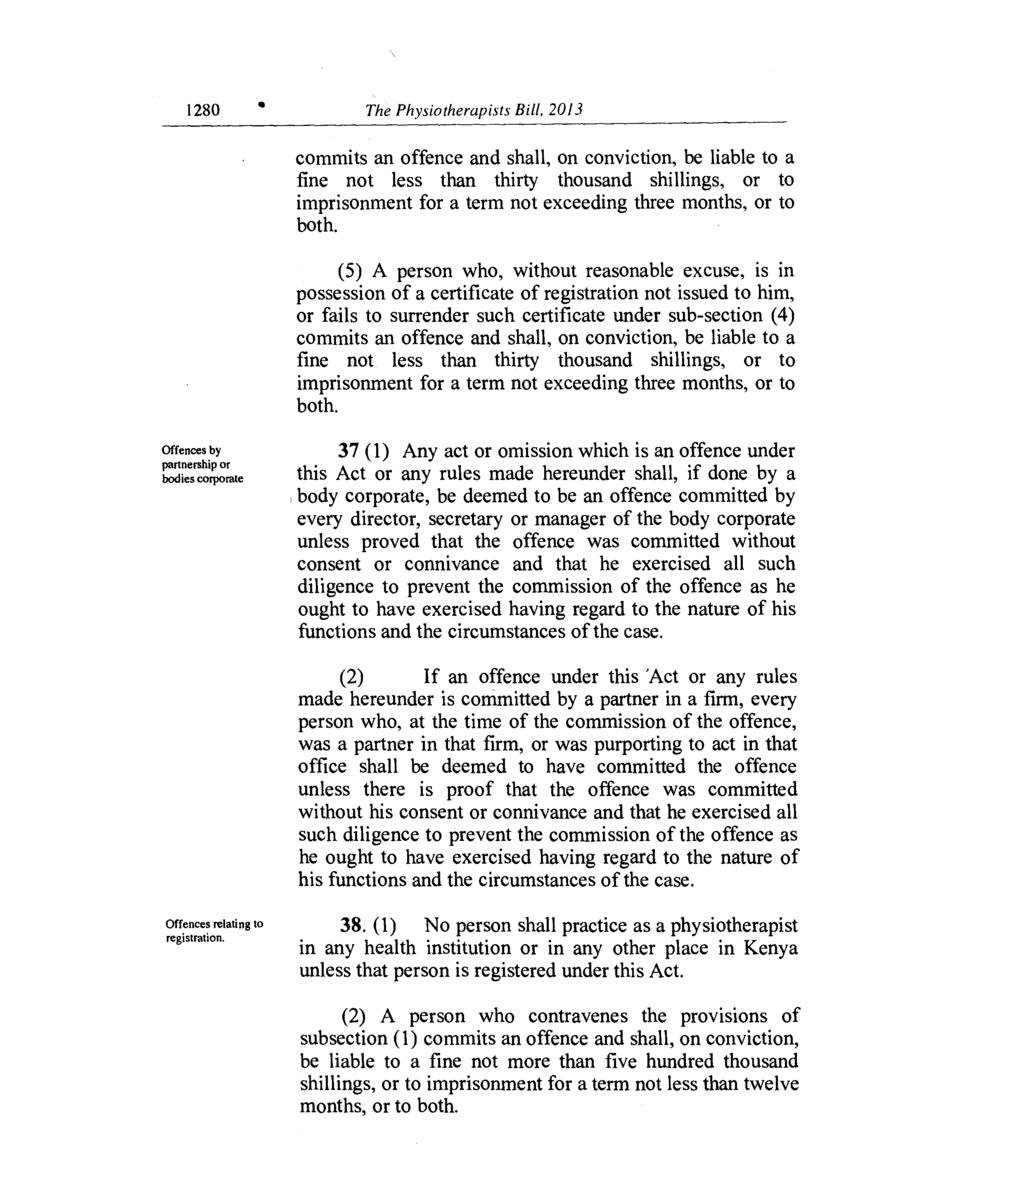 1280 Offences by partnership or bodies corporate The Physiotherapists Bill, 2013 commits an offence and shall, on conviction, be liable to a fine not less than thirty thousand shillings, or to